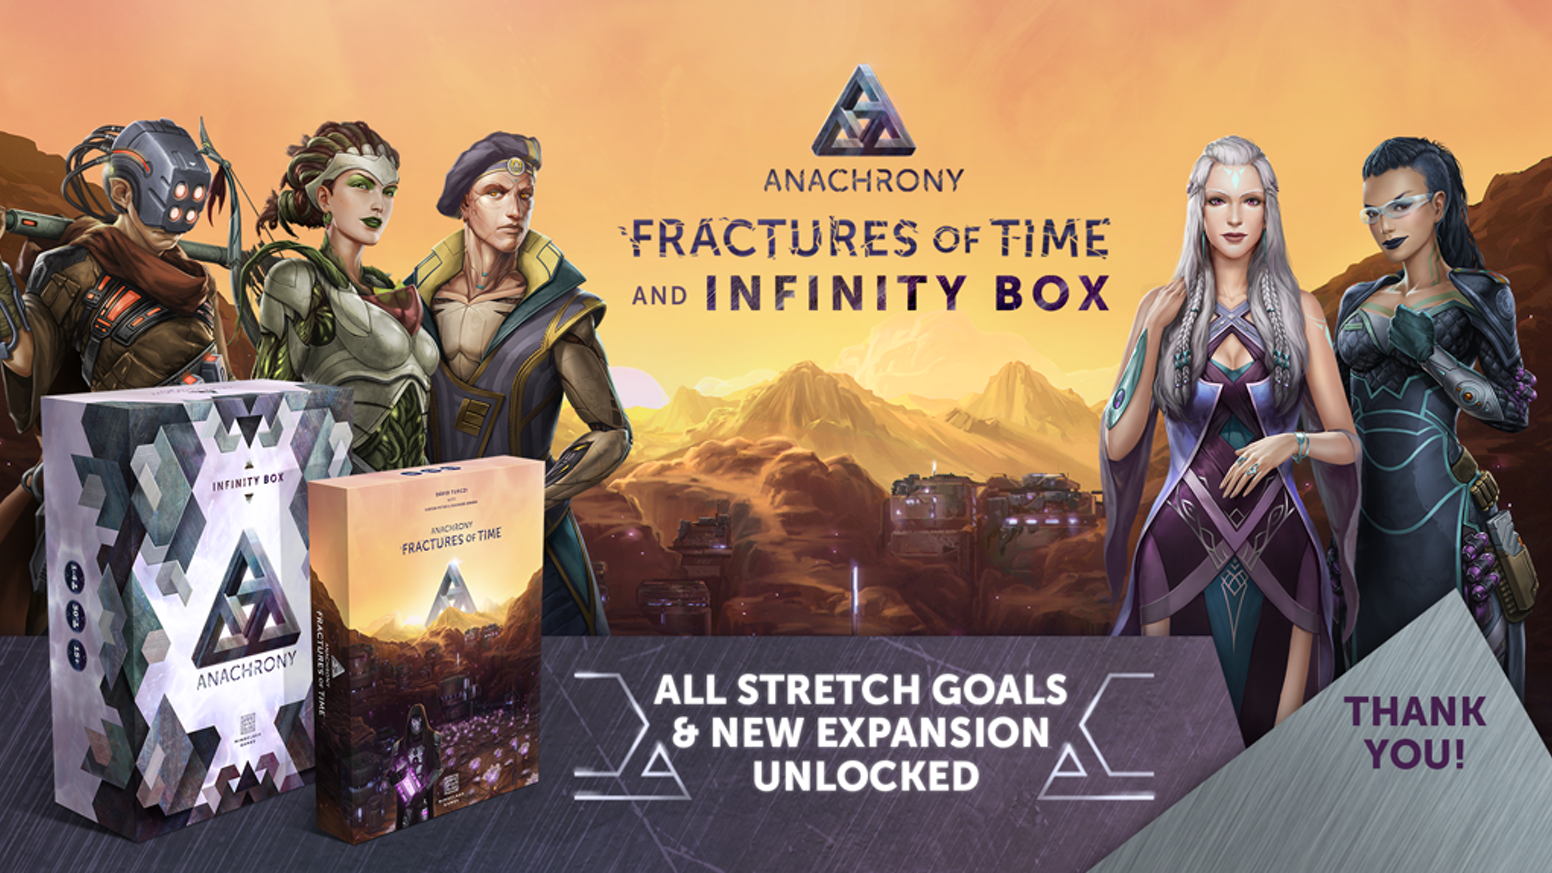 Kickstart This! #10: Anachrony: Fractures of Time Expansion and Infinity Box